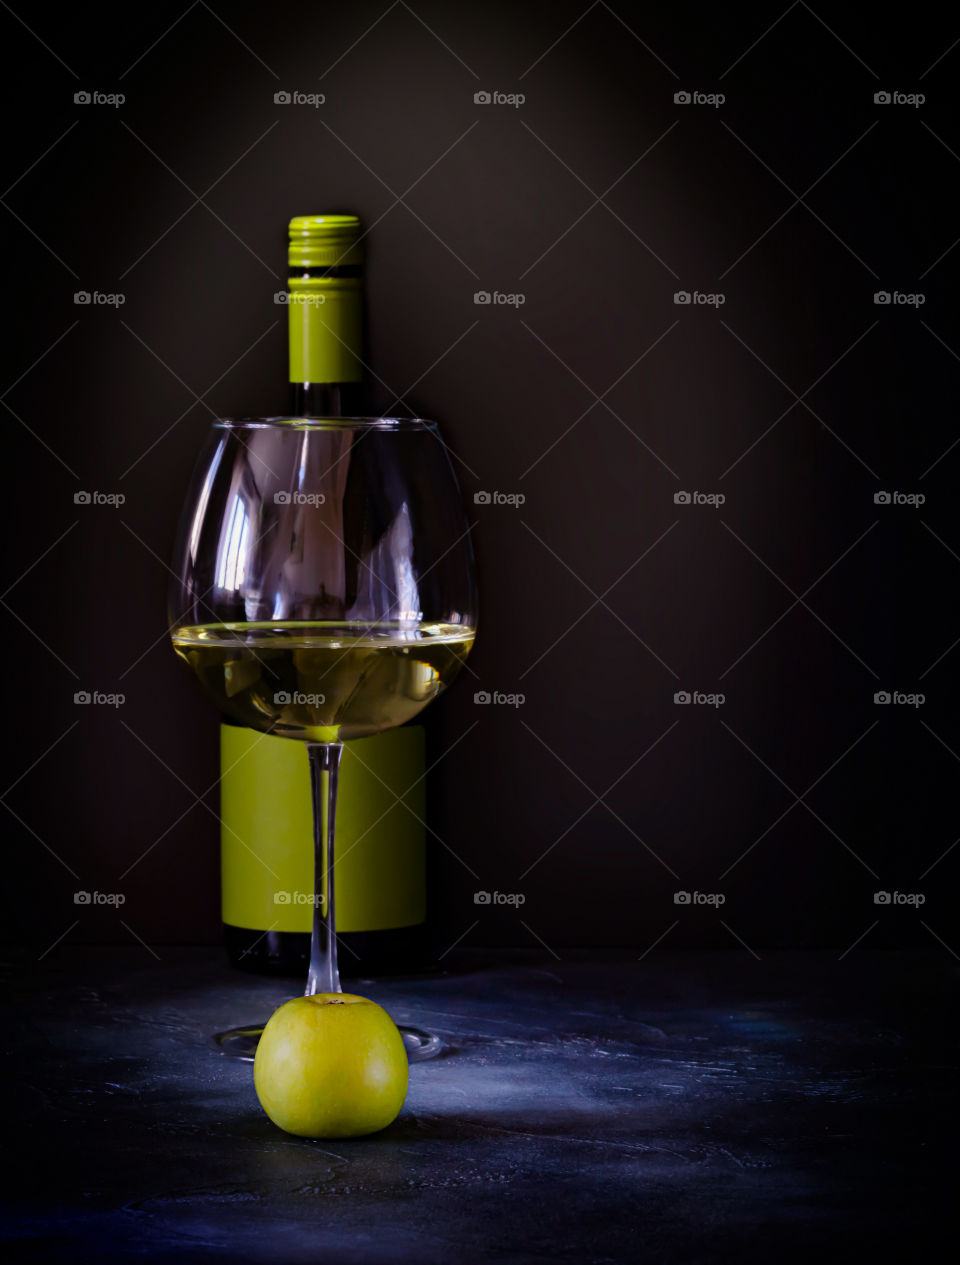 Homemade apple wine.  A bottle, a glass of white fruit wine and an apple stand in front of each other on a dark background.  Food photo, vertical orientation, copy space